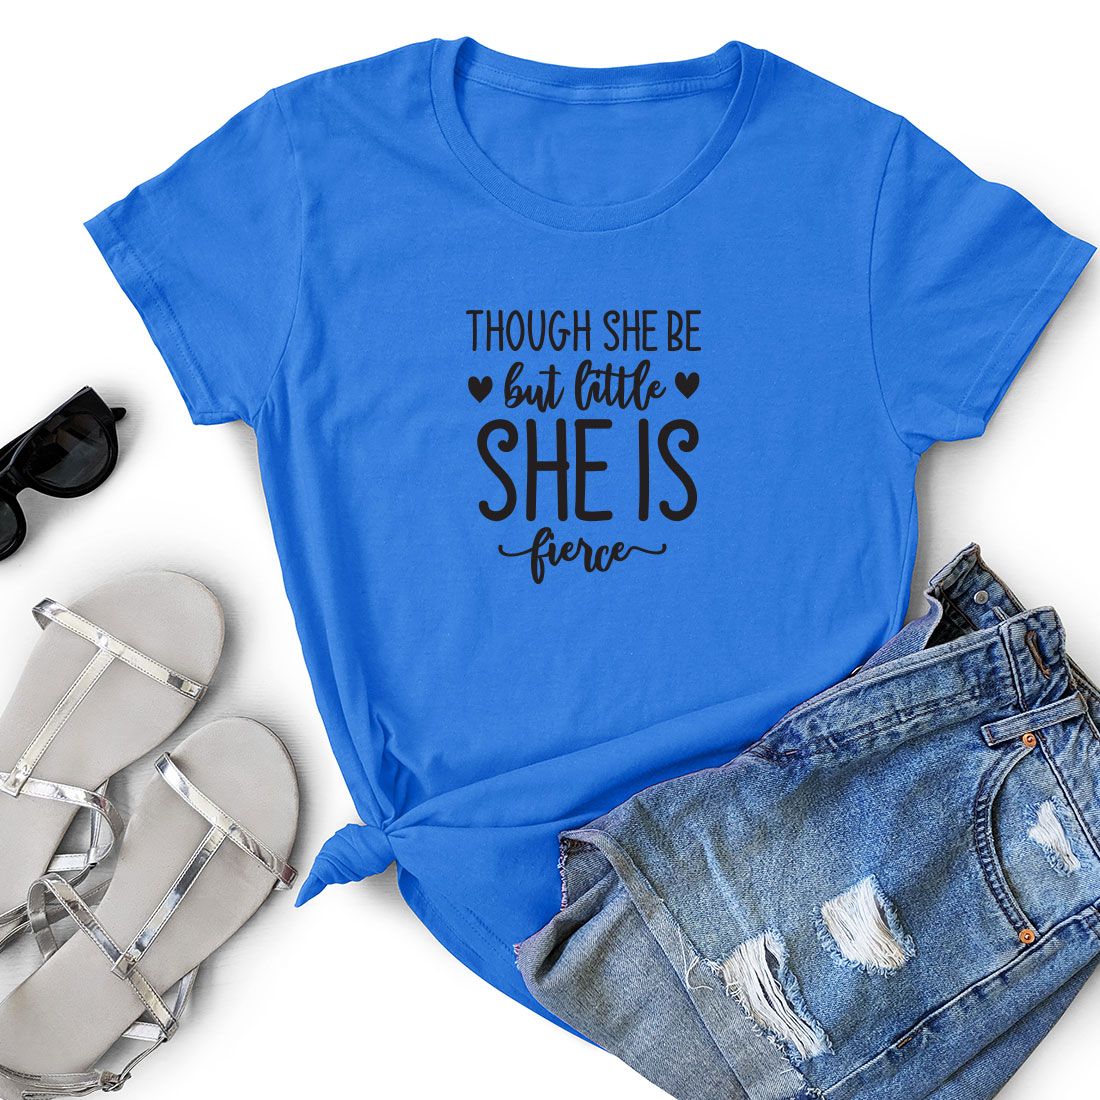 Blue shirt that says though she be but little she is fierce.